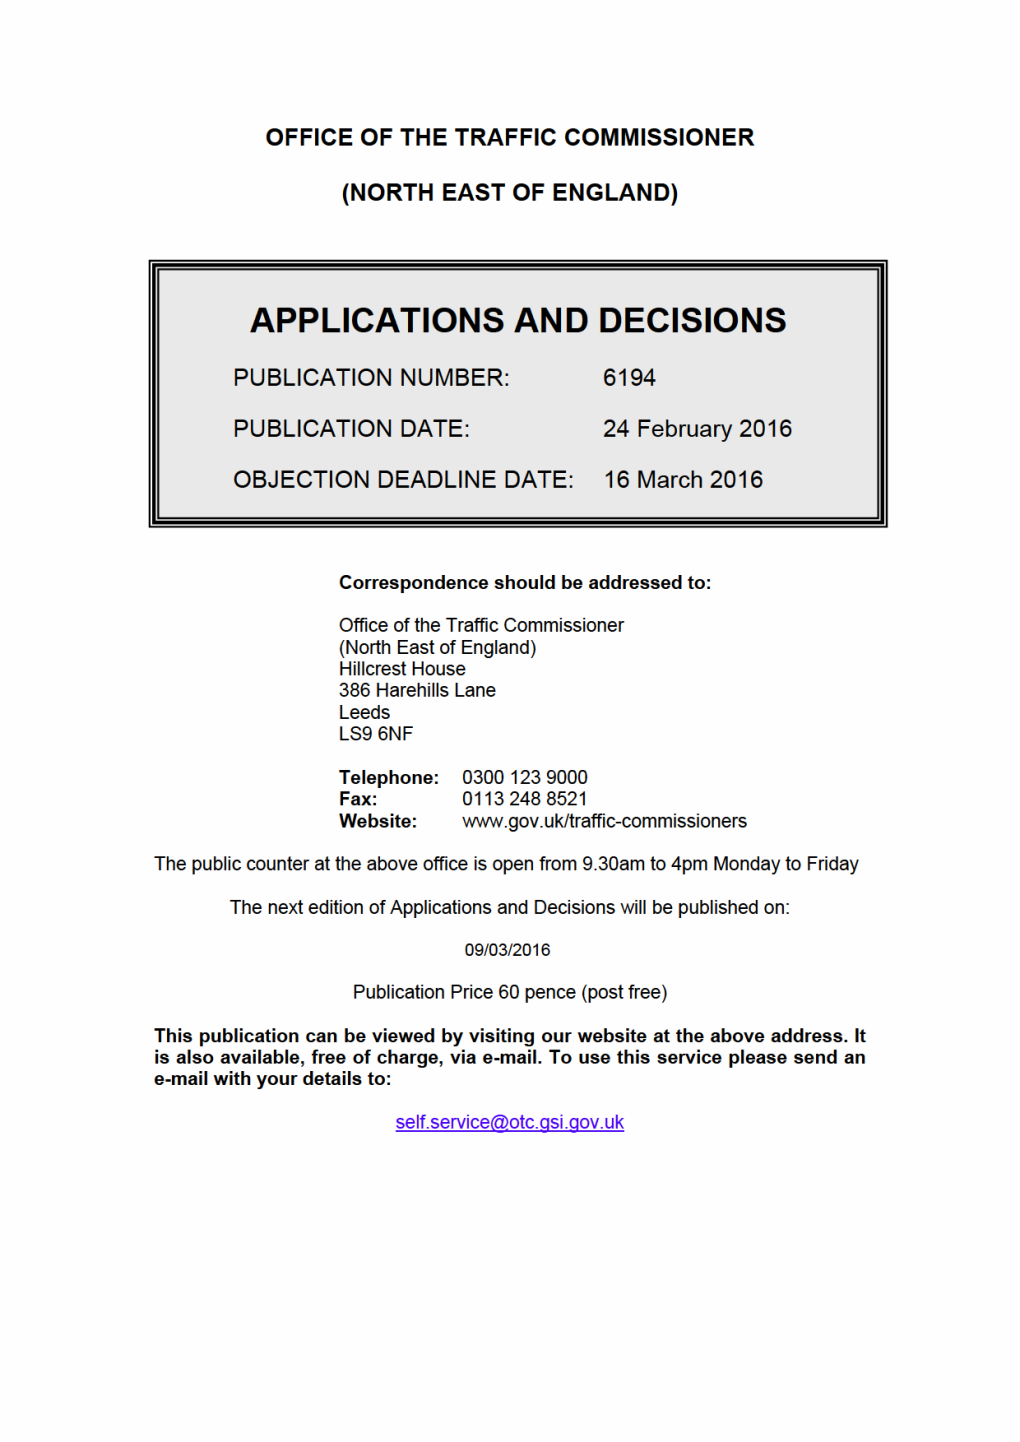 APPLICATIONS and DECISIONS 24 February 2016